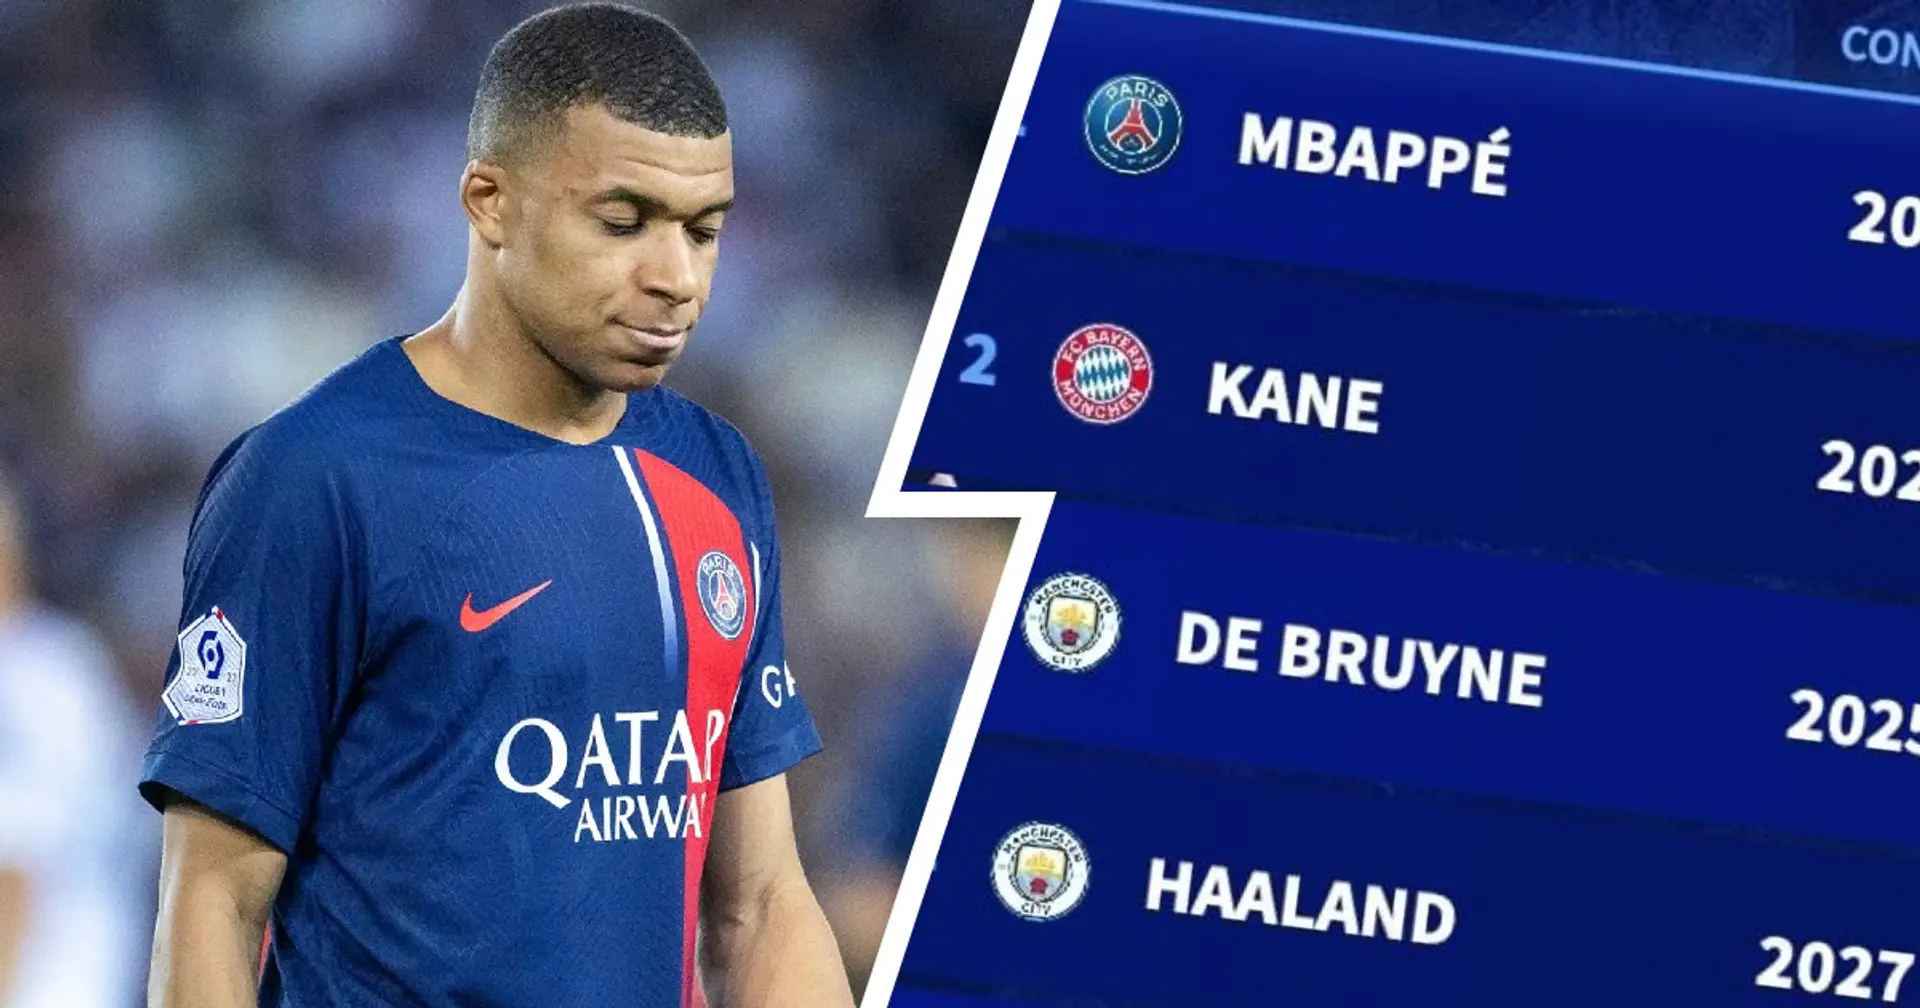 Mbappe to drop from 1st to 10th by monthly wages at Real Madrid? It's not as simple as it seems